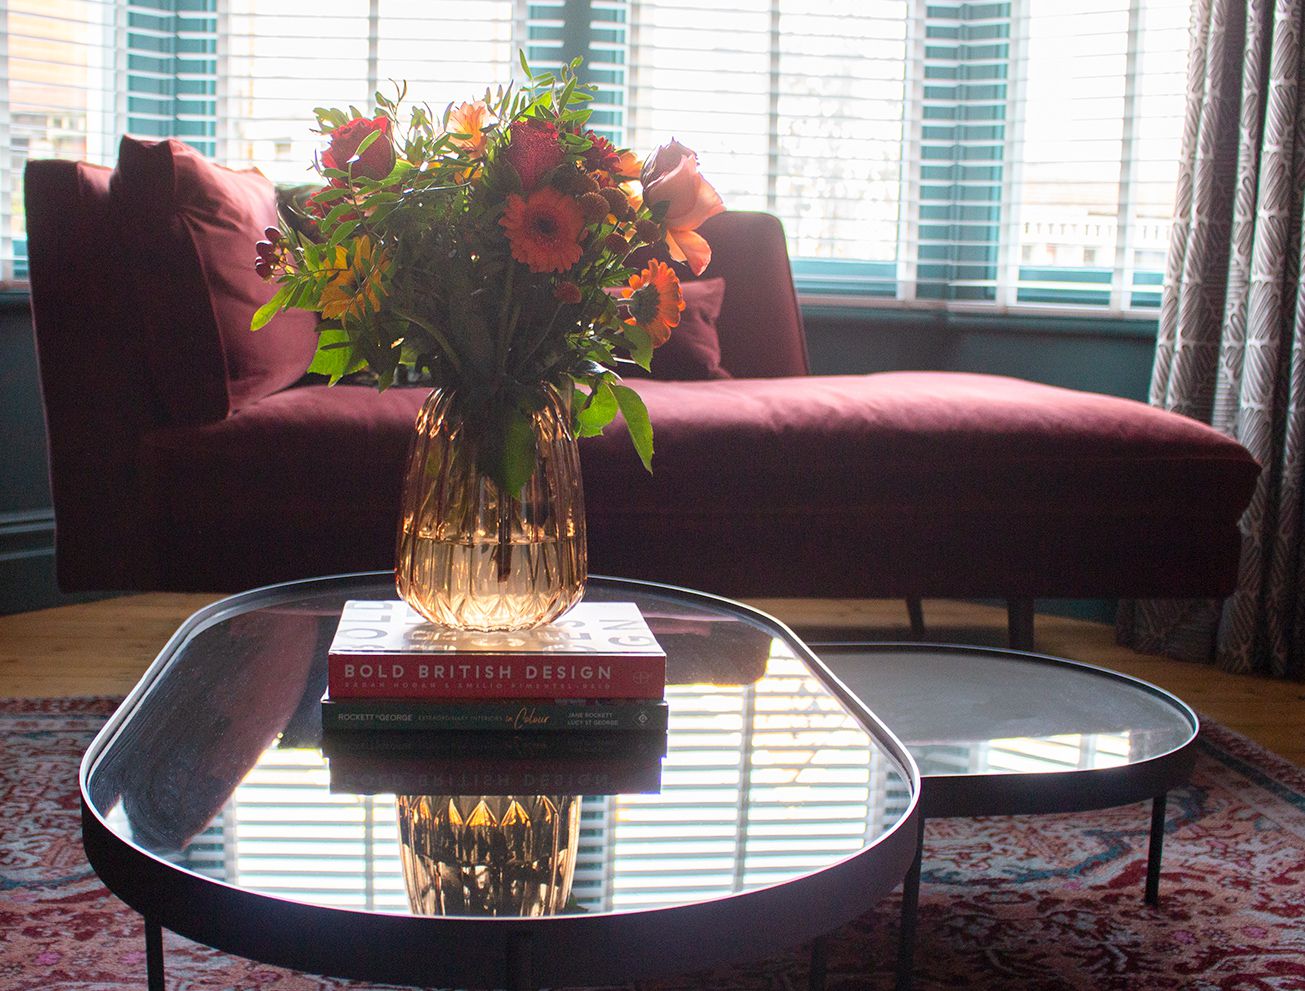 A photo showing the claret coloured chaise long, with brightly coloured flowers in front of it on the coffee table.